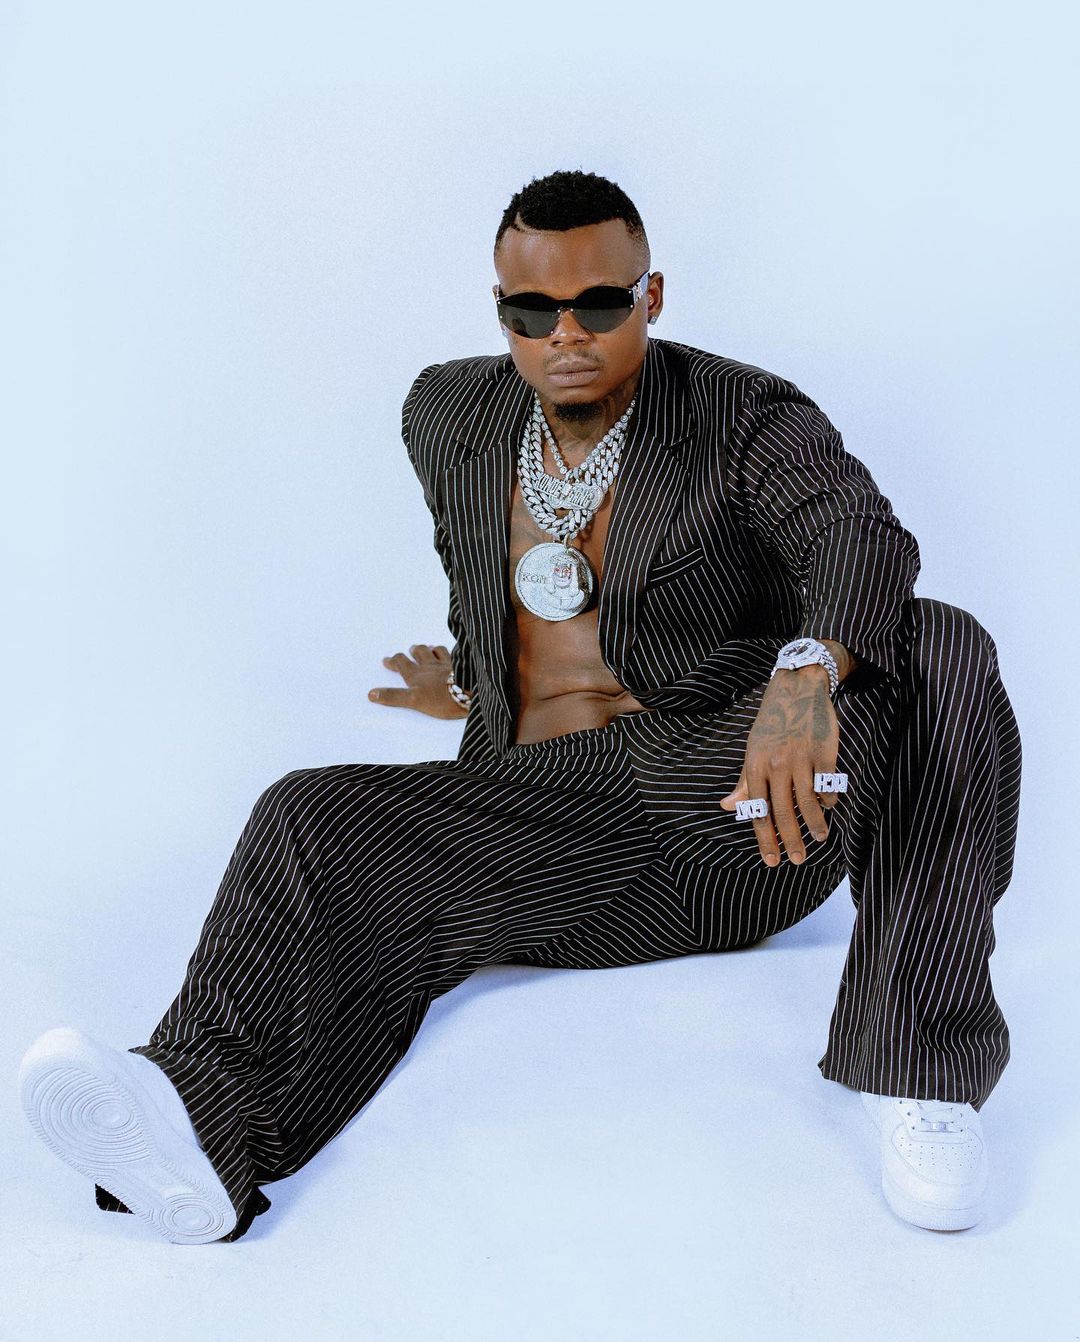 Harmonize releases a new song “I Miss You” dedicating to his Wife Kajala